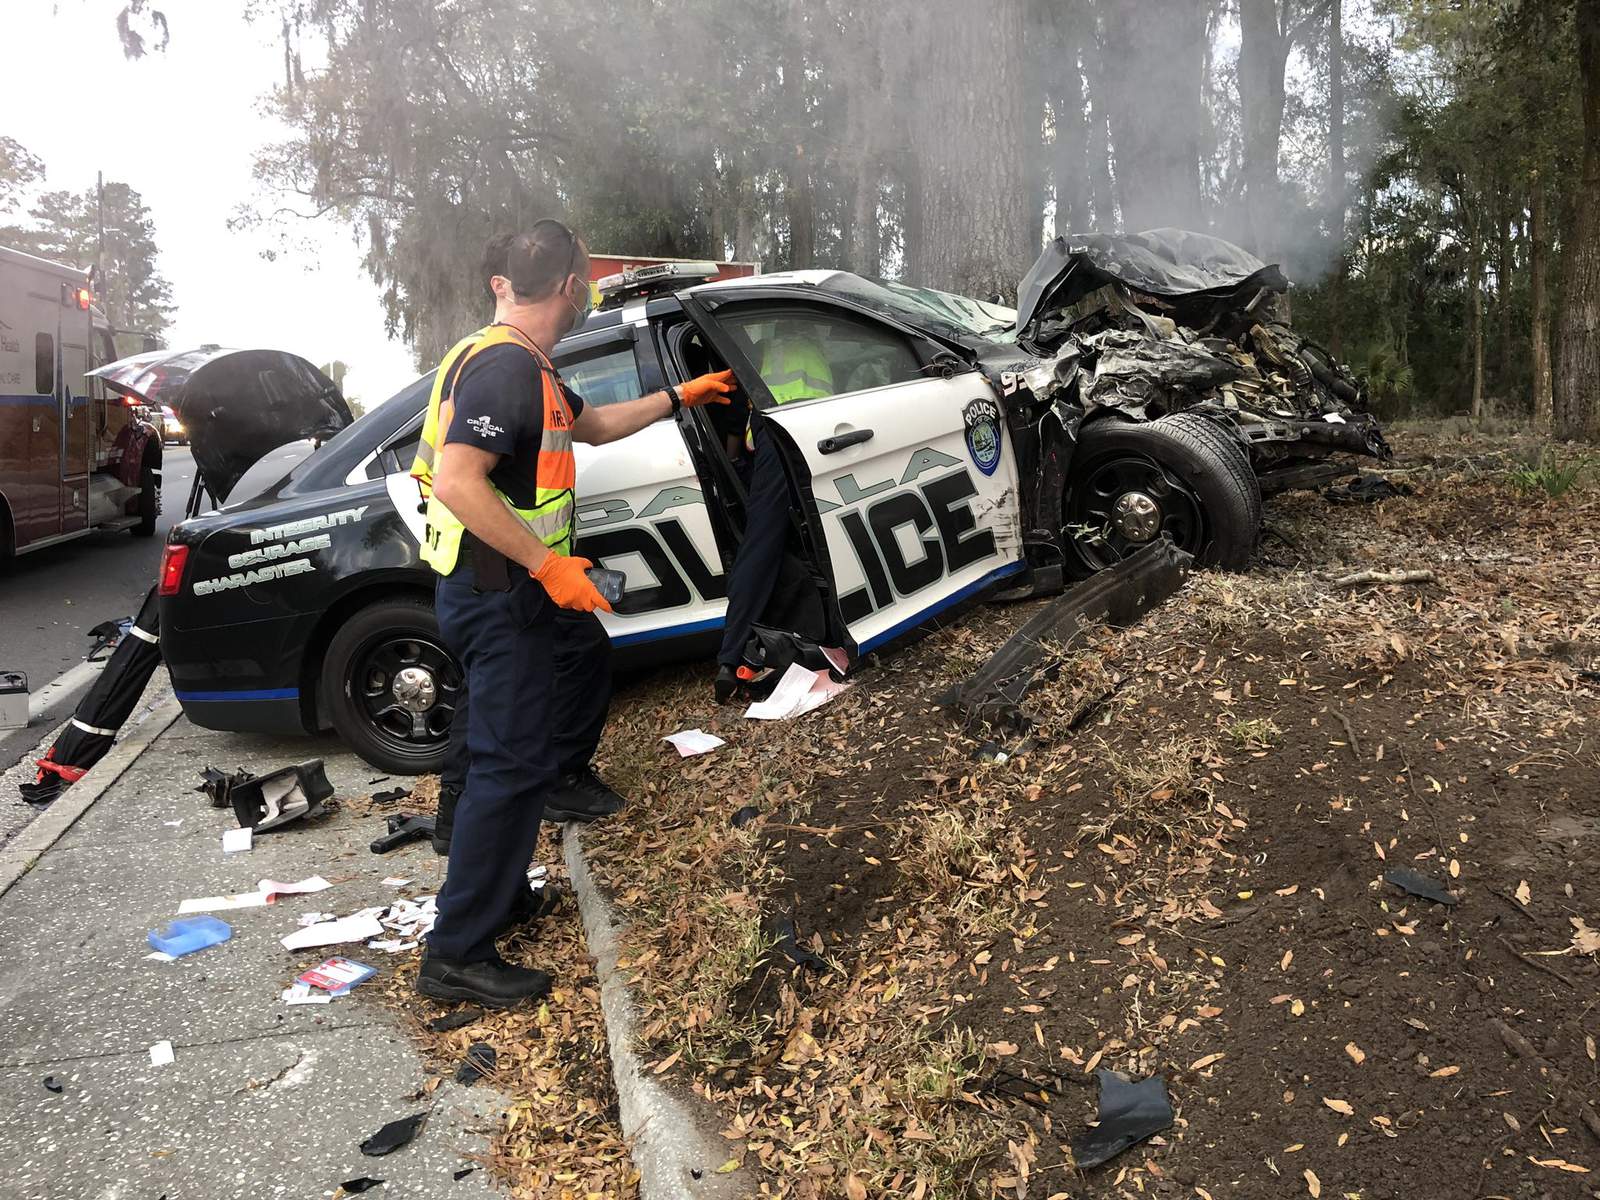 Ocala officer-involved in serious crash, police say